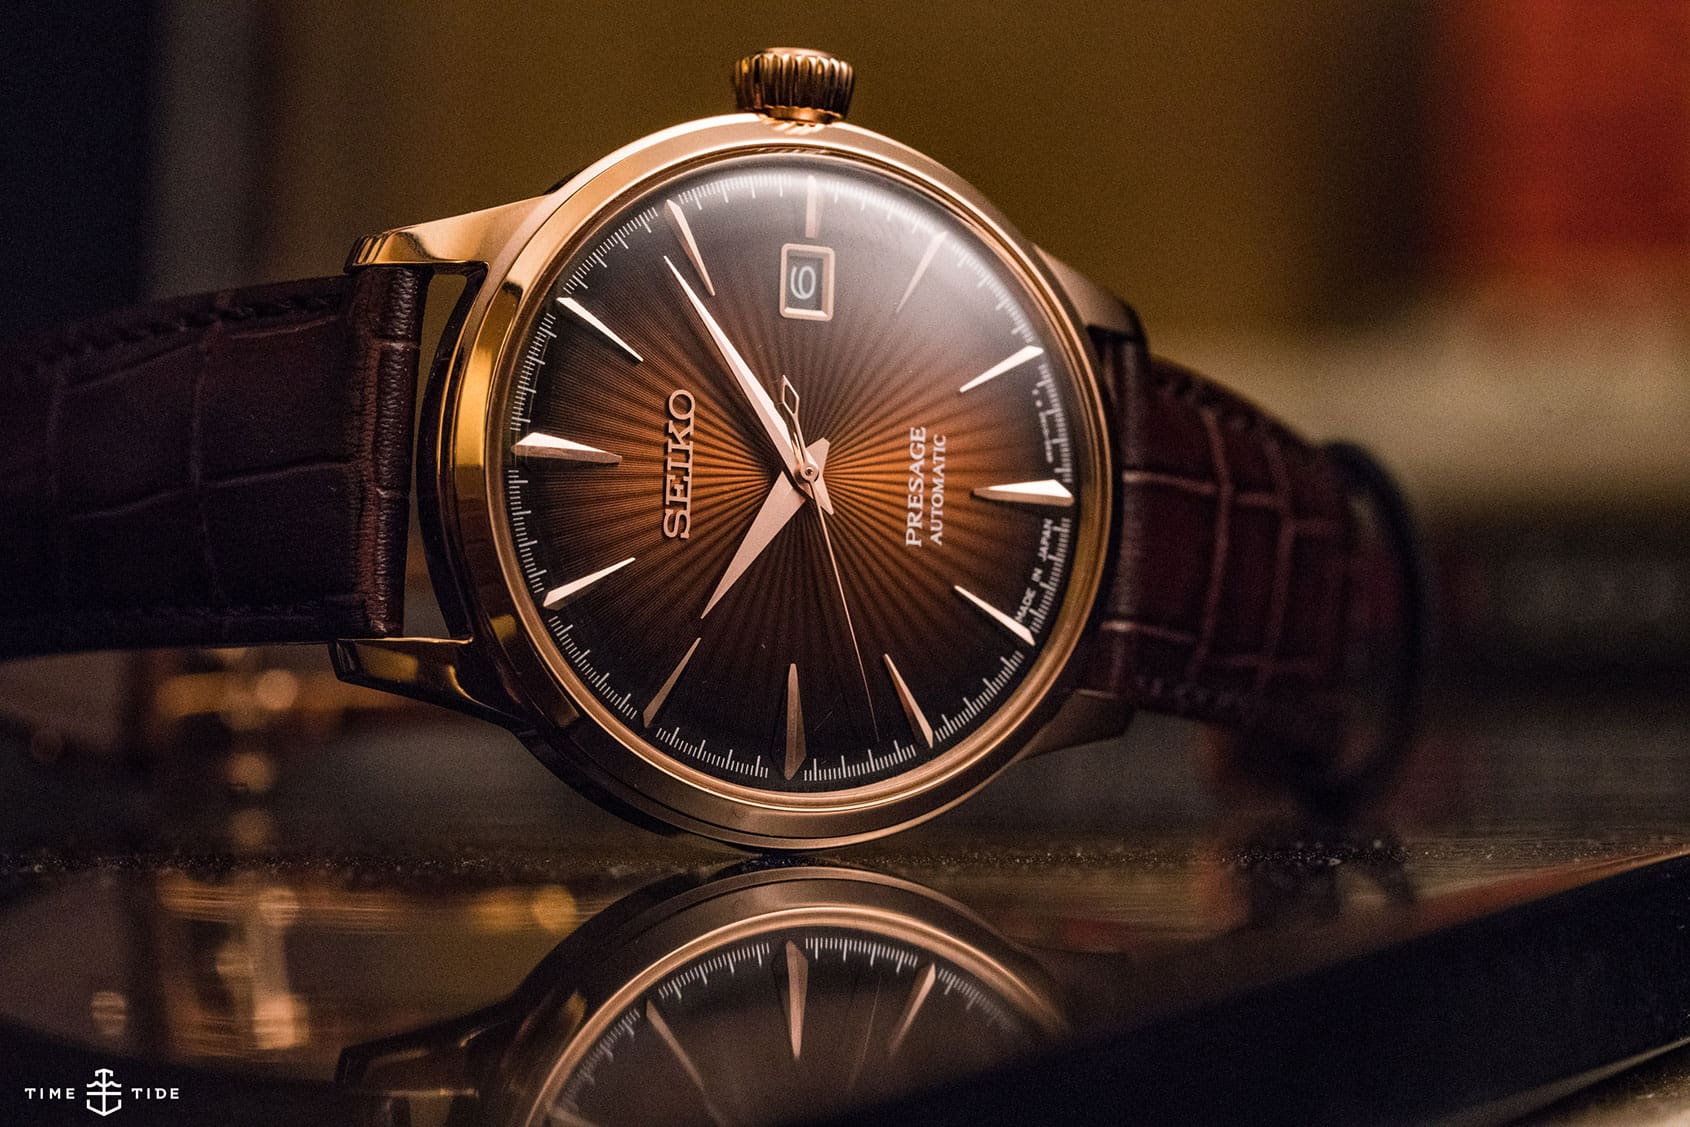 This Seiko is one of the best dress watches in the game right now, and it costs less than a grand